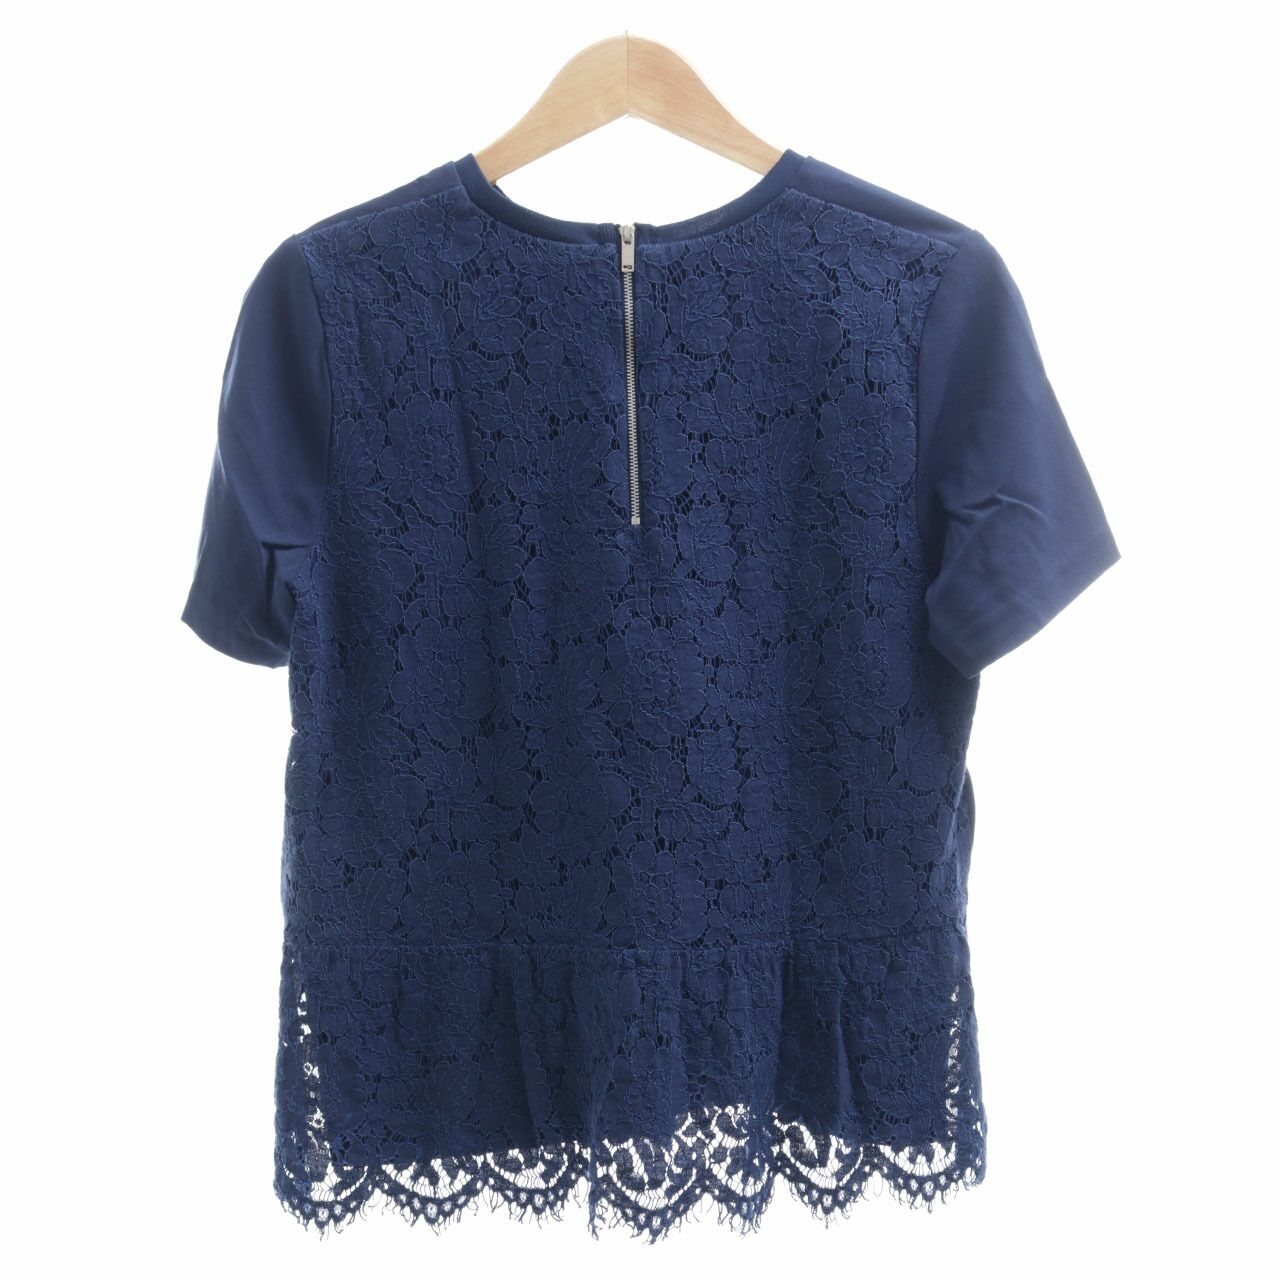 SEED Navy Lace Blouse